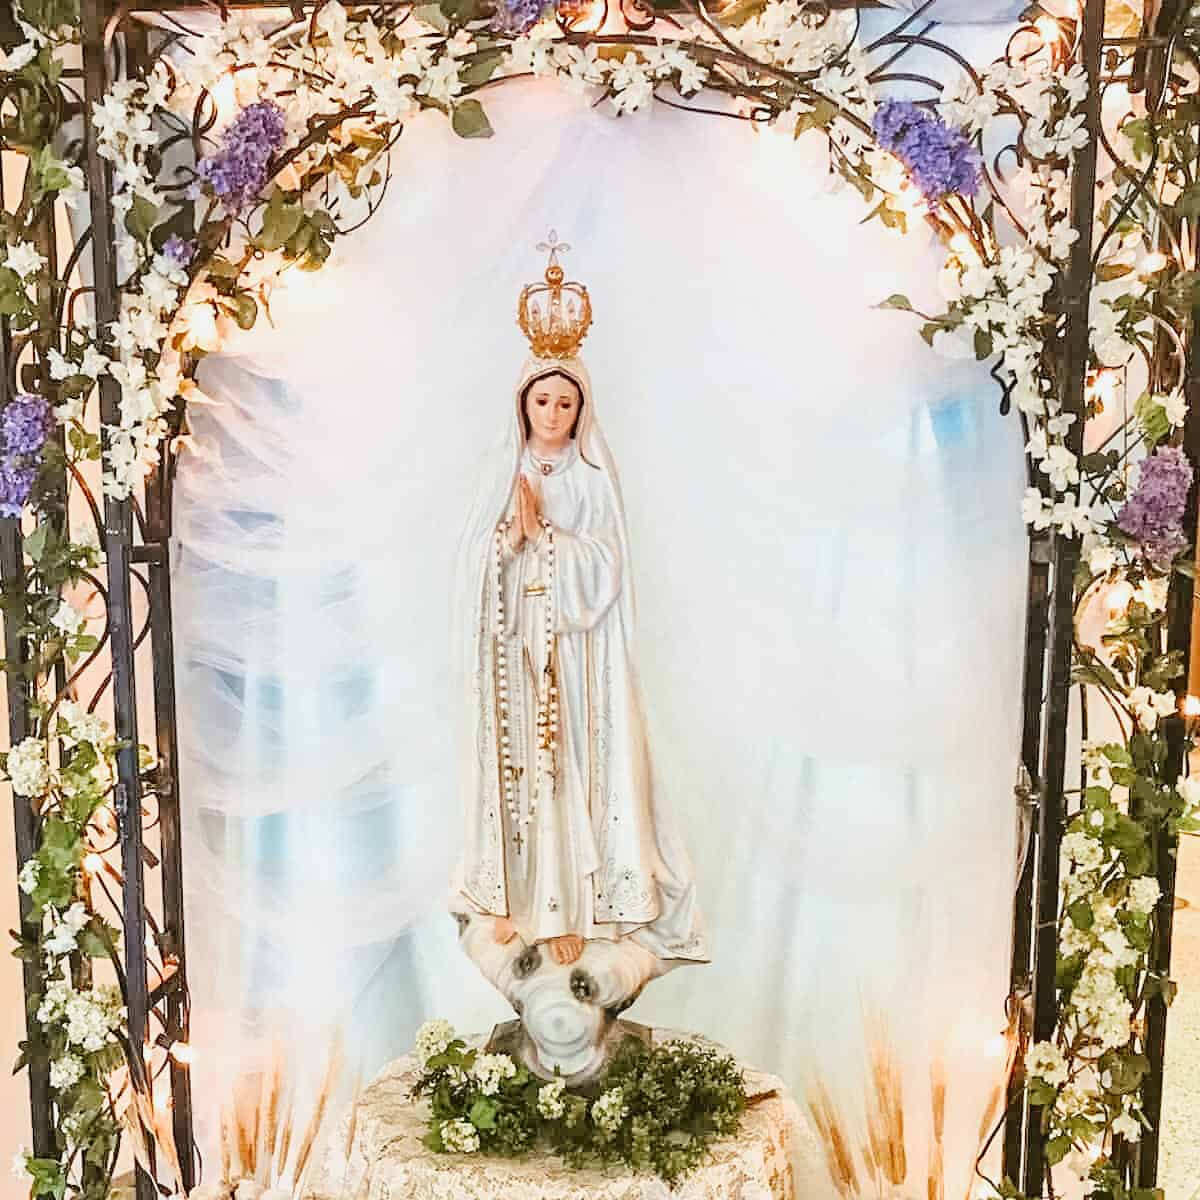 statue of Our Lady of Fatima with an archway of flowers surrounding it.